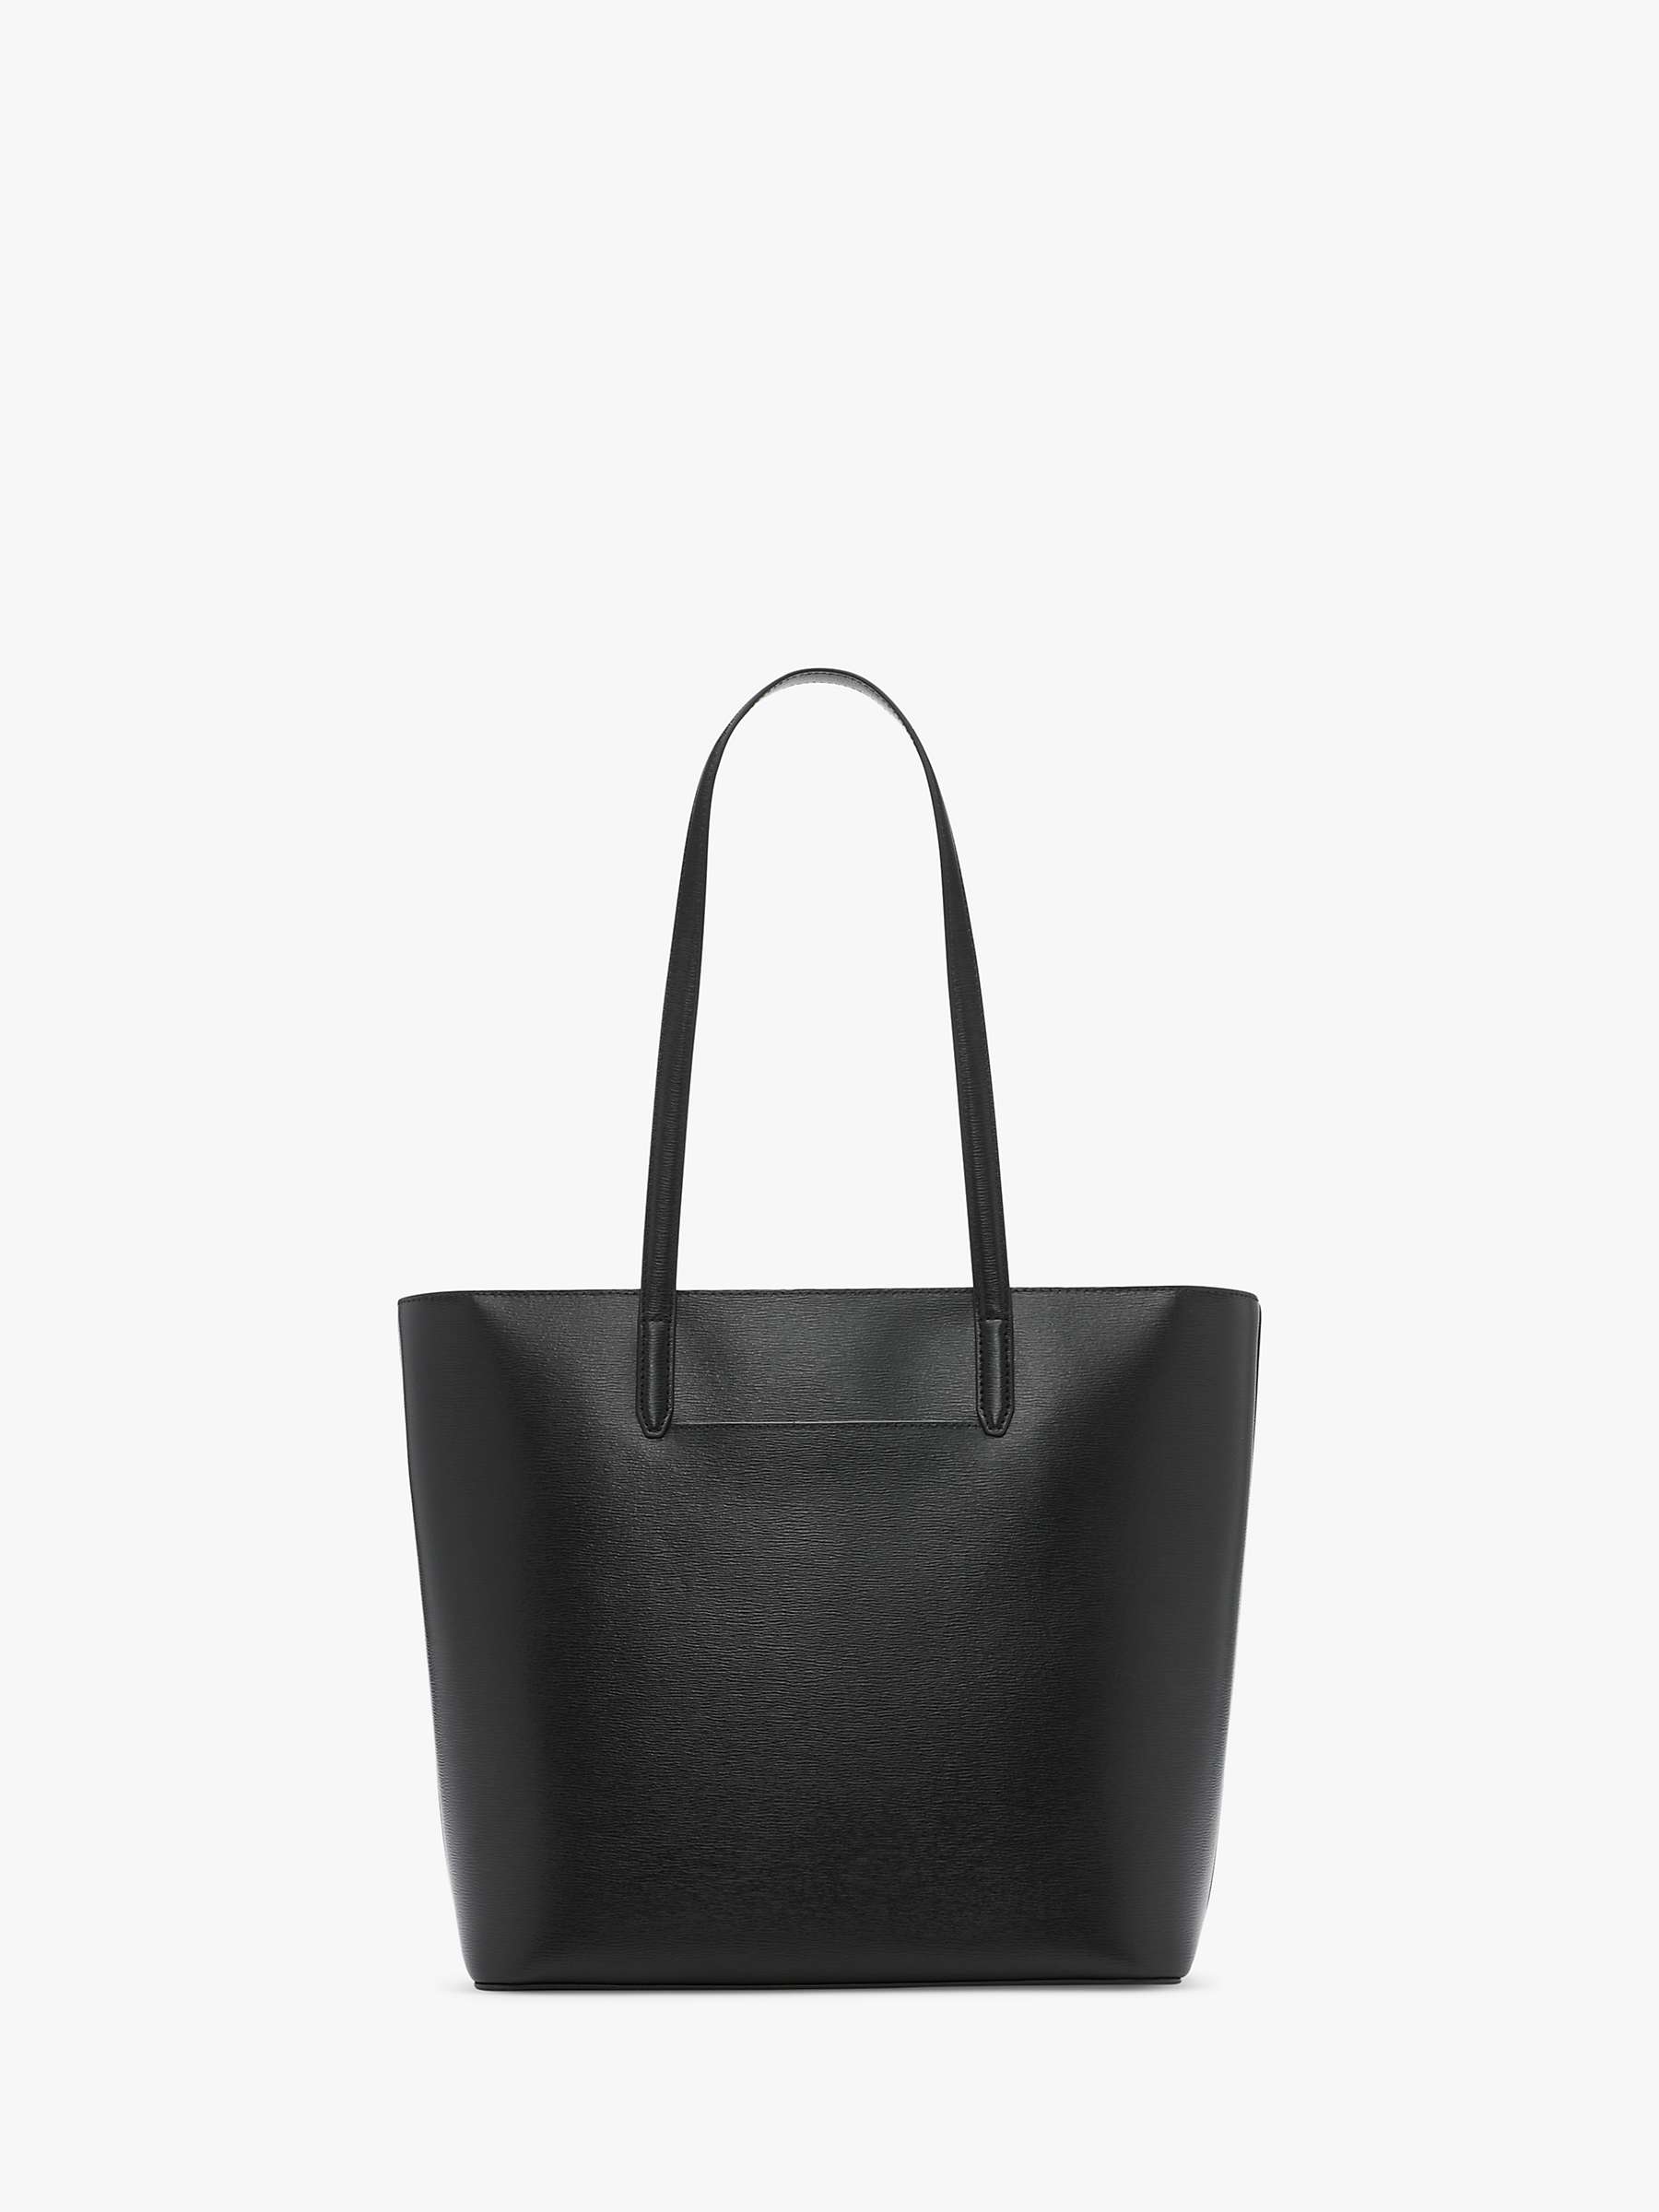 DKNY Bryant North South Leather Tote Bag, Black at John Lewis & Partners